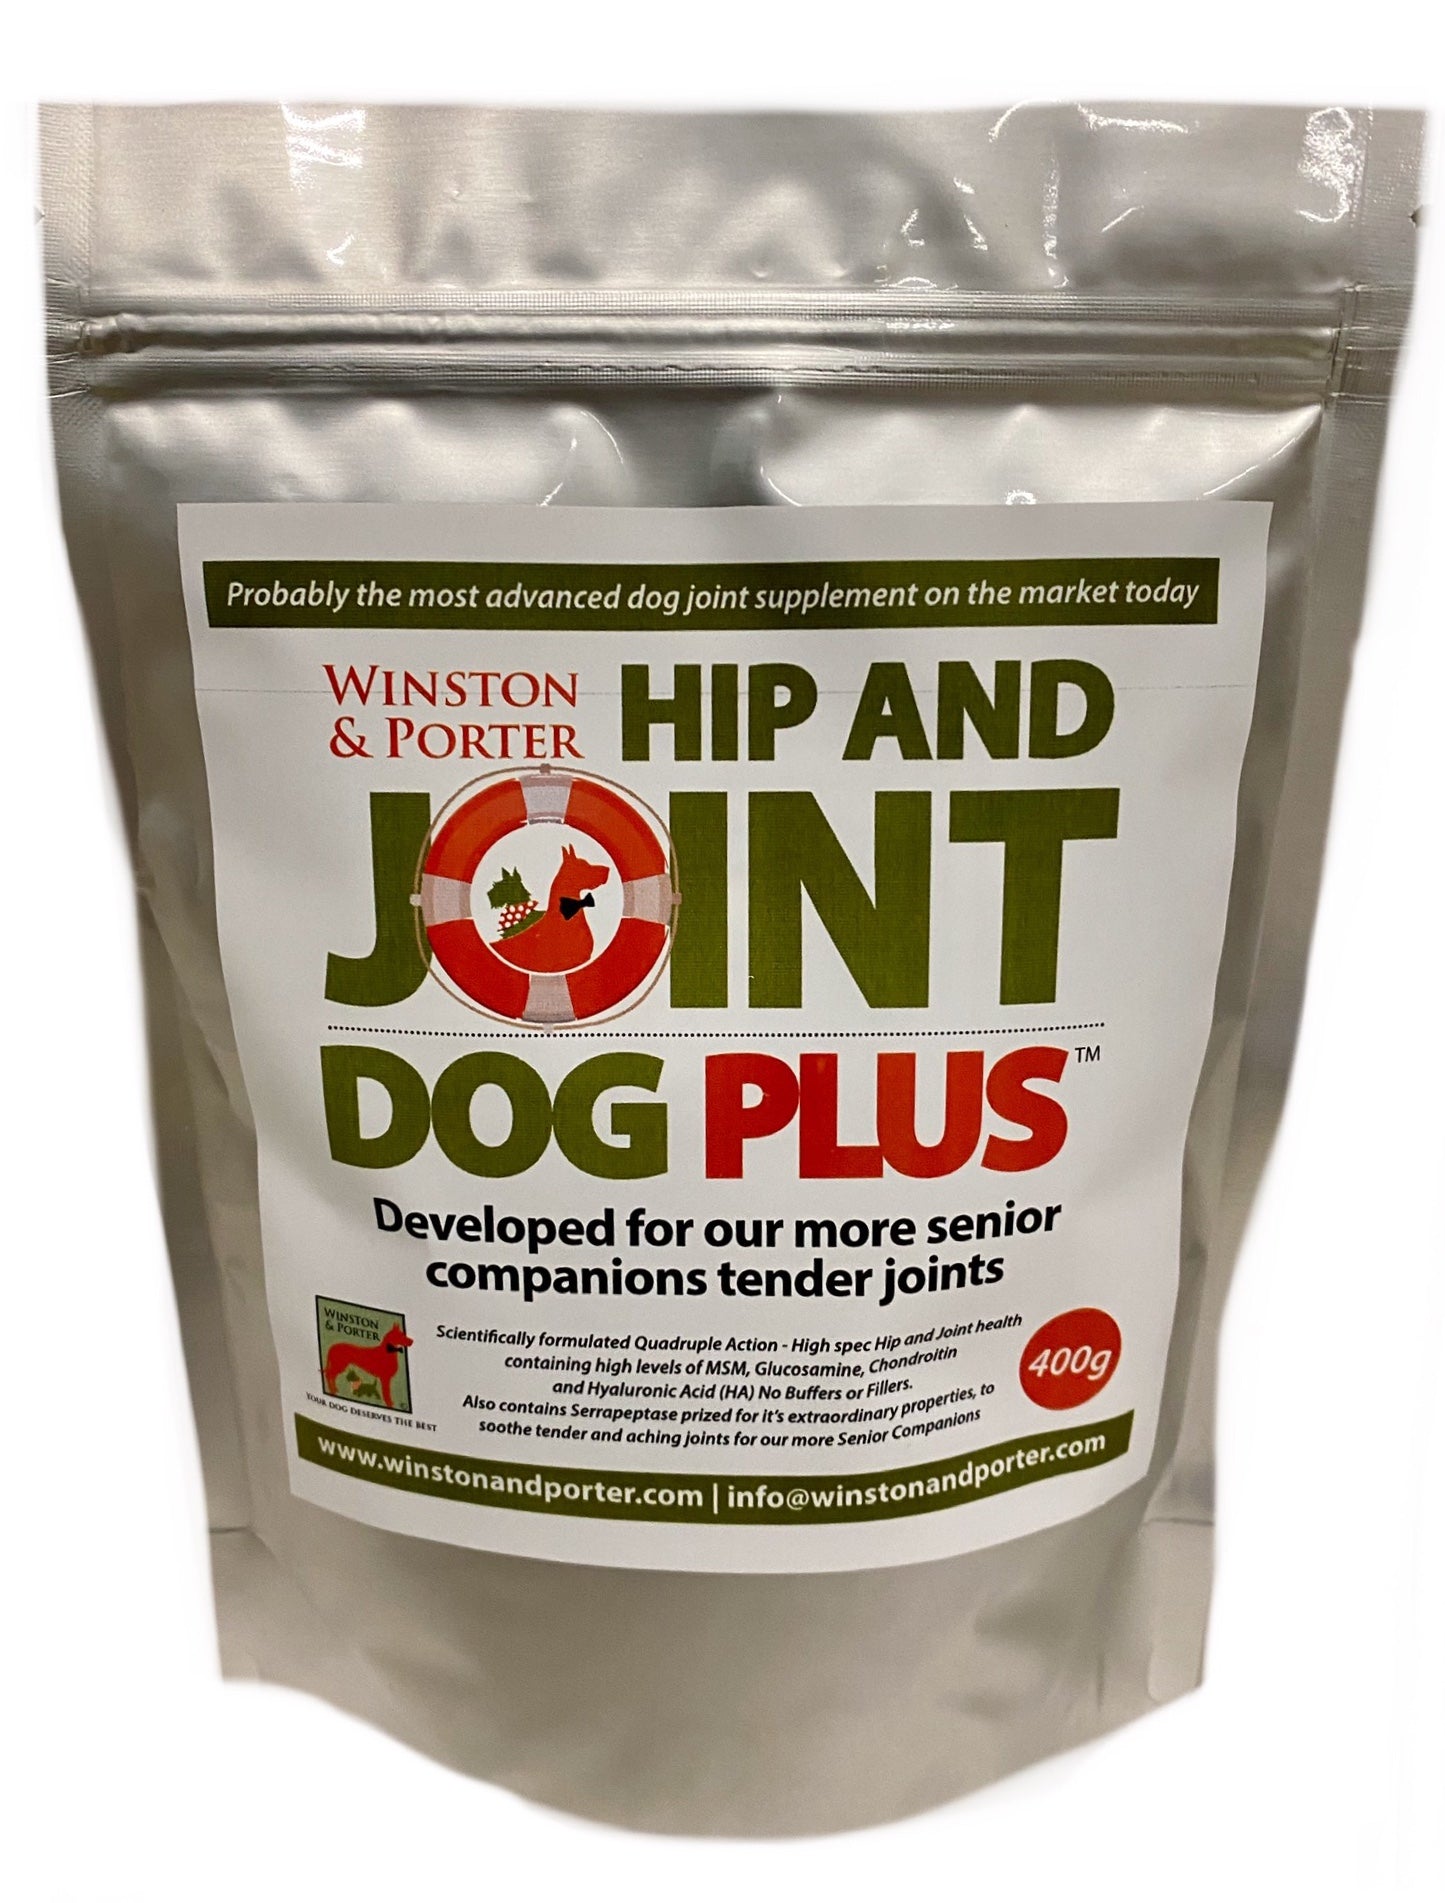 Hip and Joint Dog PLUS